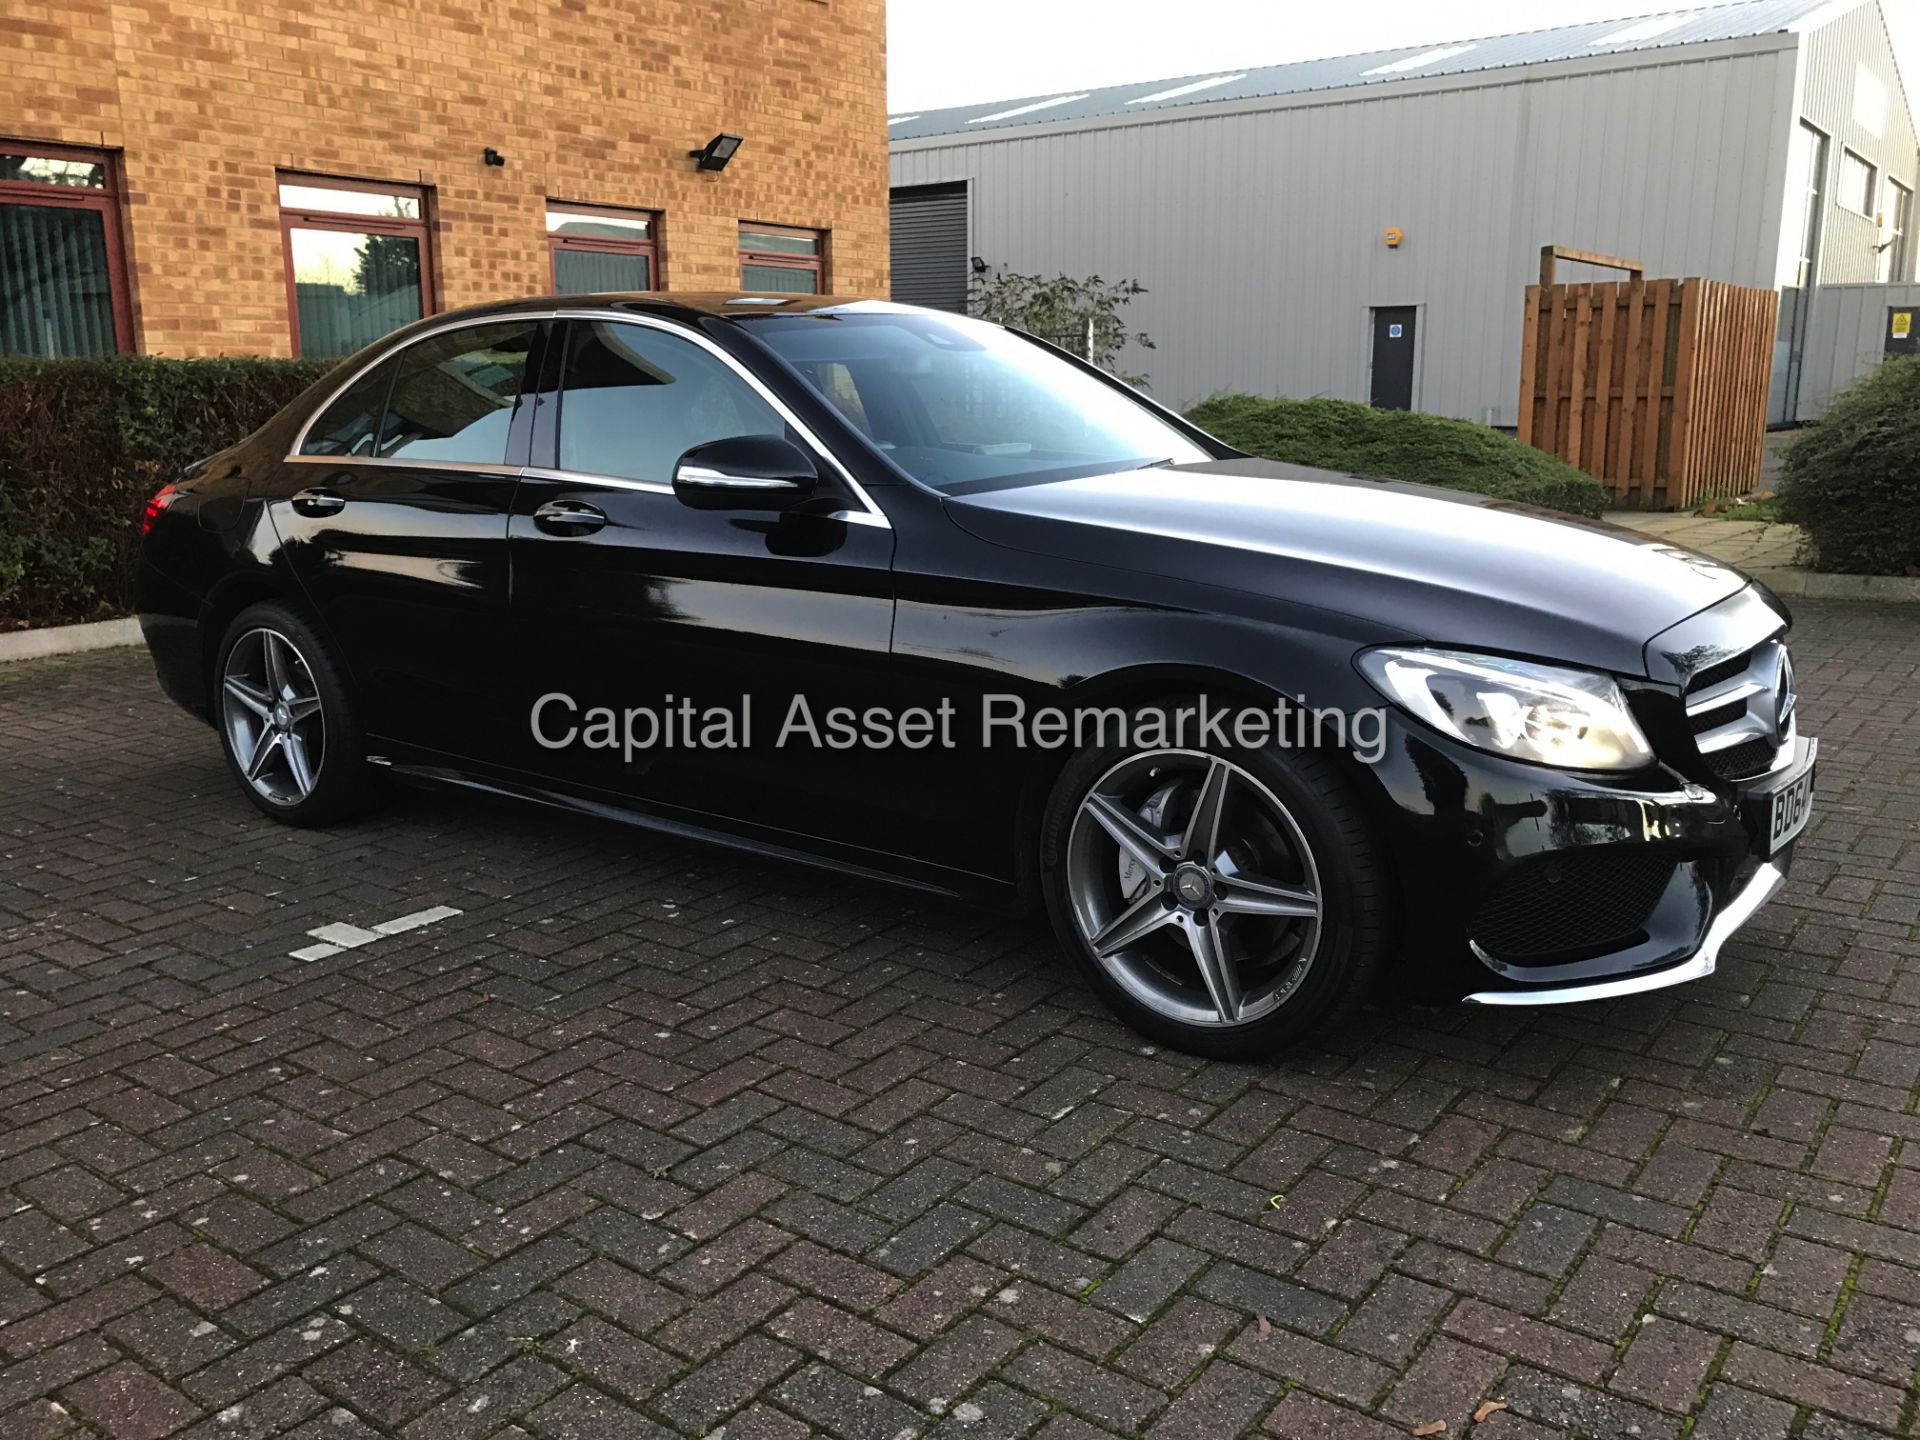 ON SALE MERCEDES C220CDI "PREMIUM PLUS" 7G TRONIC (2015 MODEL) PAN ROOF - COMMAND NAV - LEATHER - - Image 2 of 28